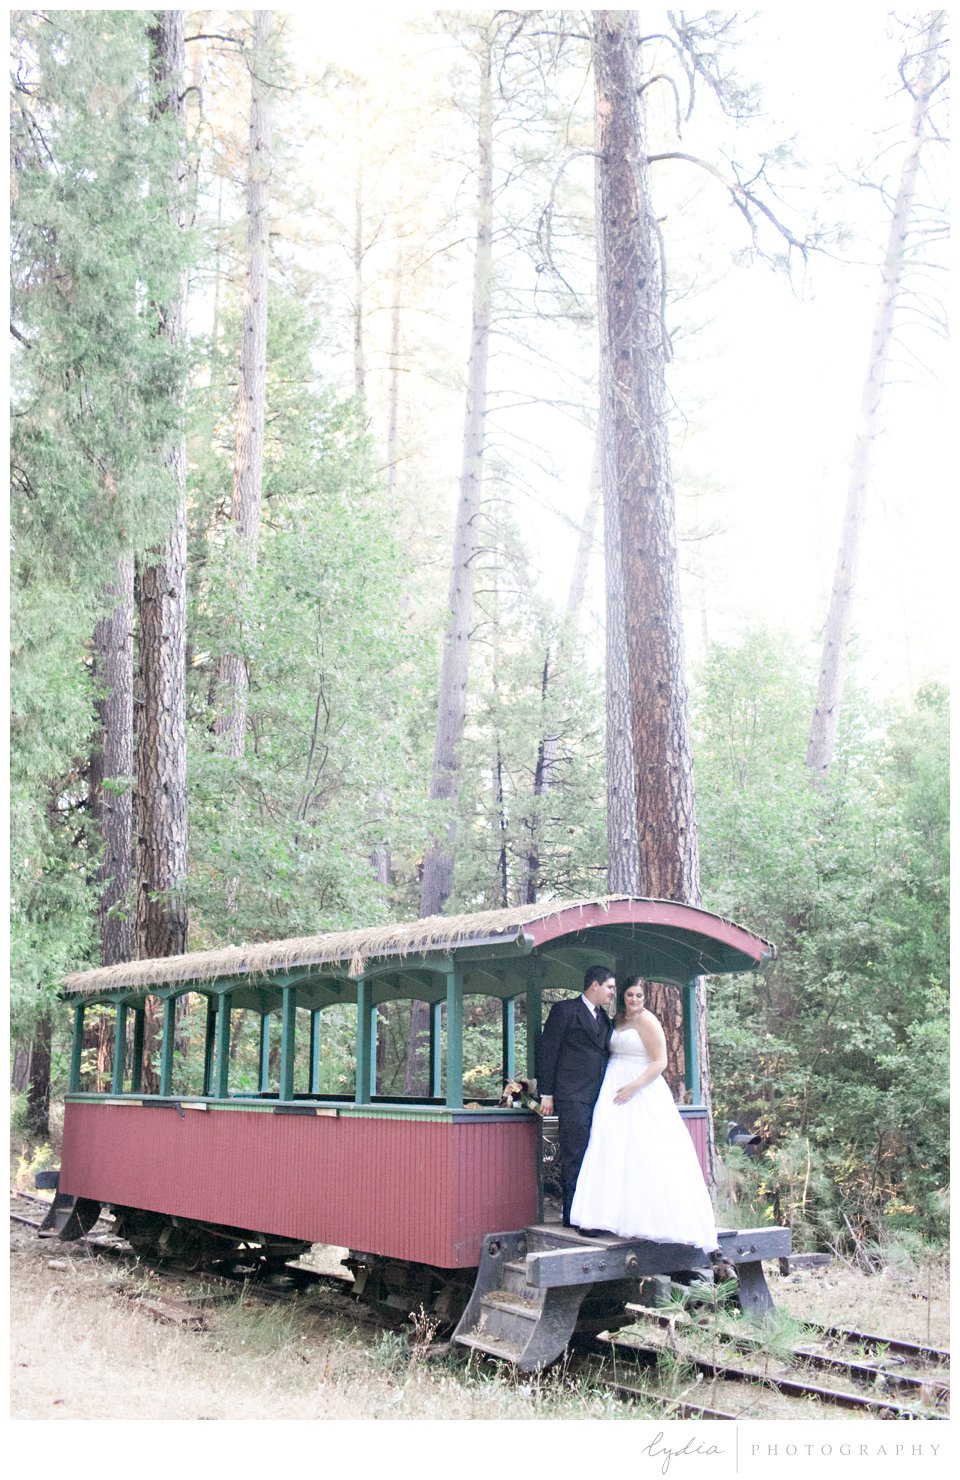 Bride and groom standing on train platform at Northern Queen Inn Wedding in Nevada City, California.